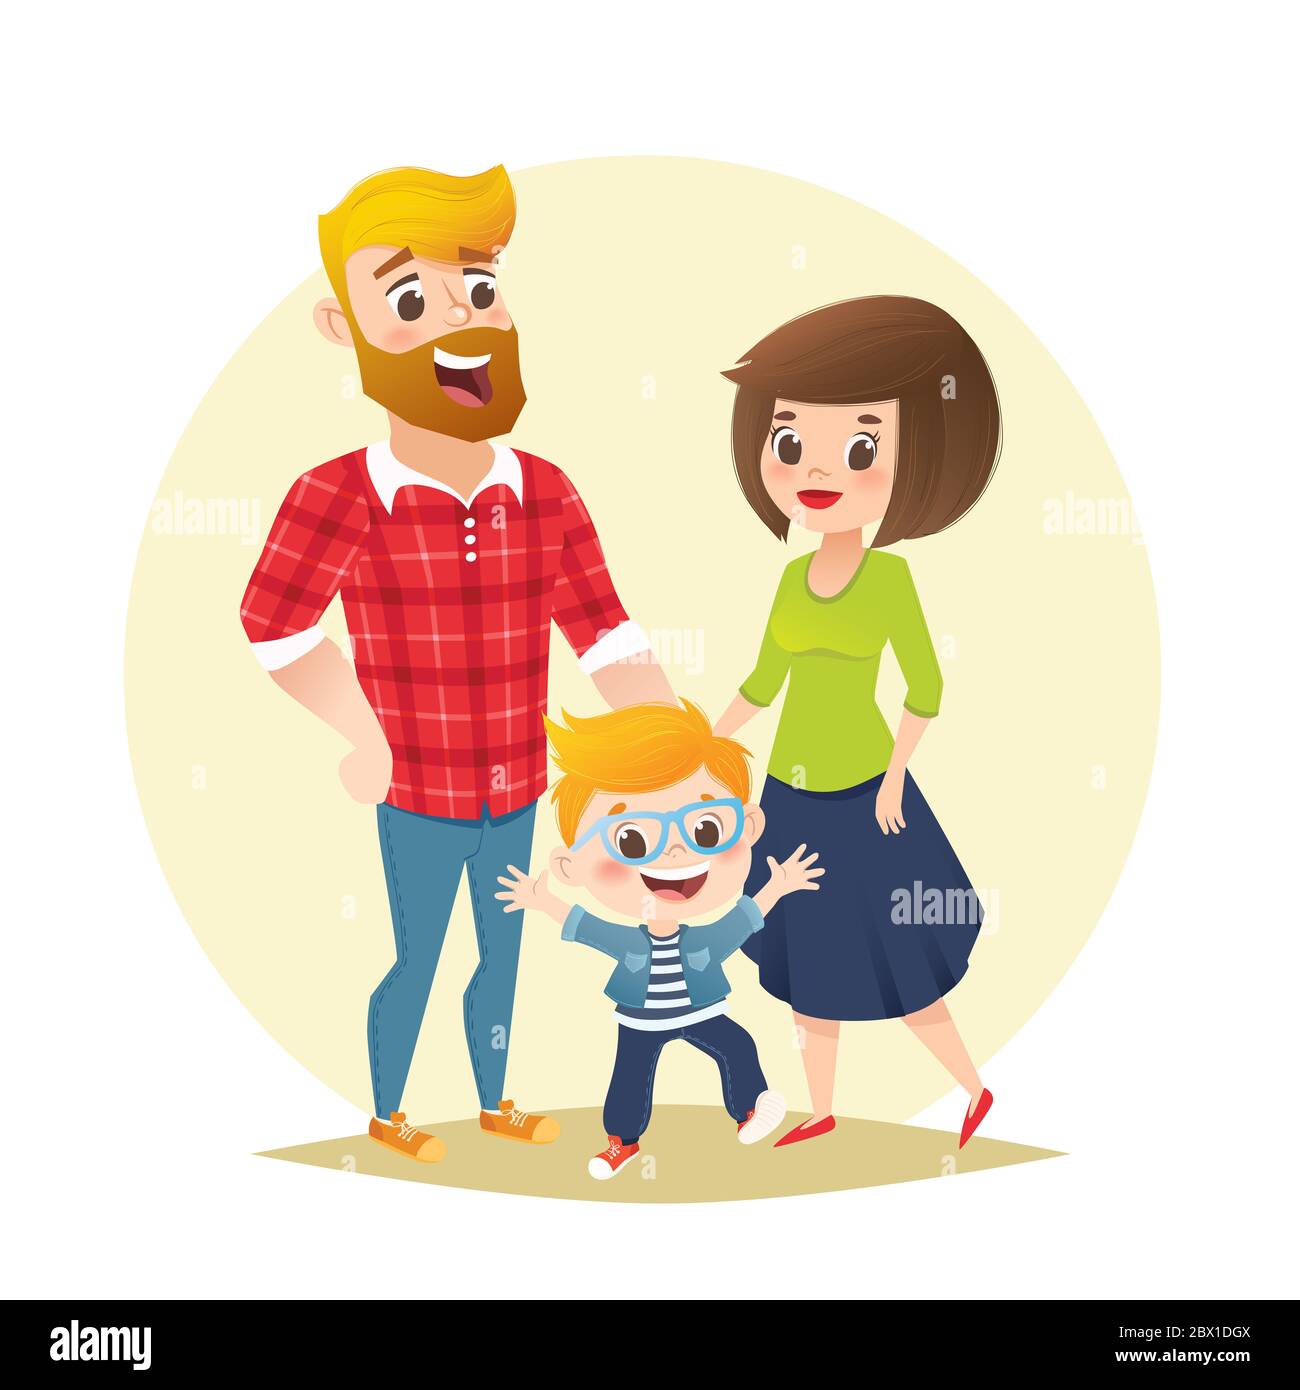 Vector cartoon family in casual clothes. Boy jumping and laughing with his mom and dad. Funny expressive characters design isolated on white backgroun Stock Photo